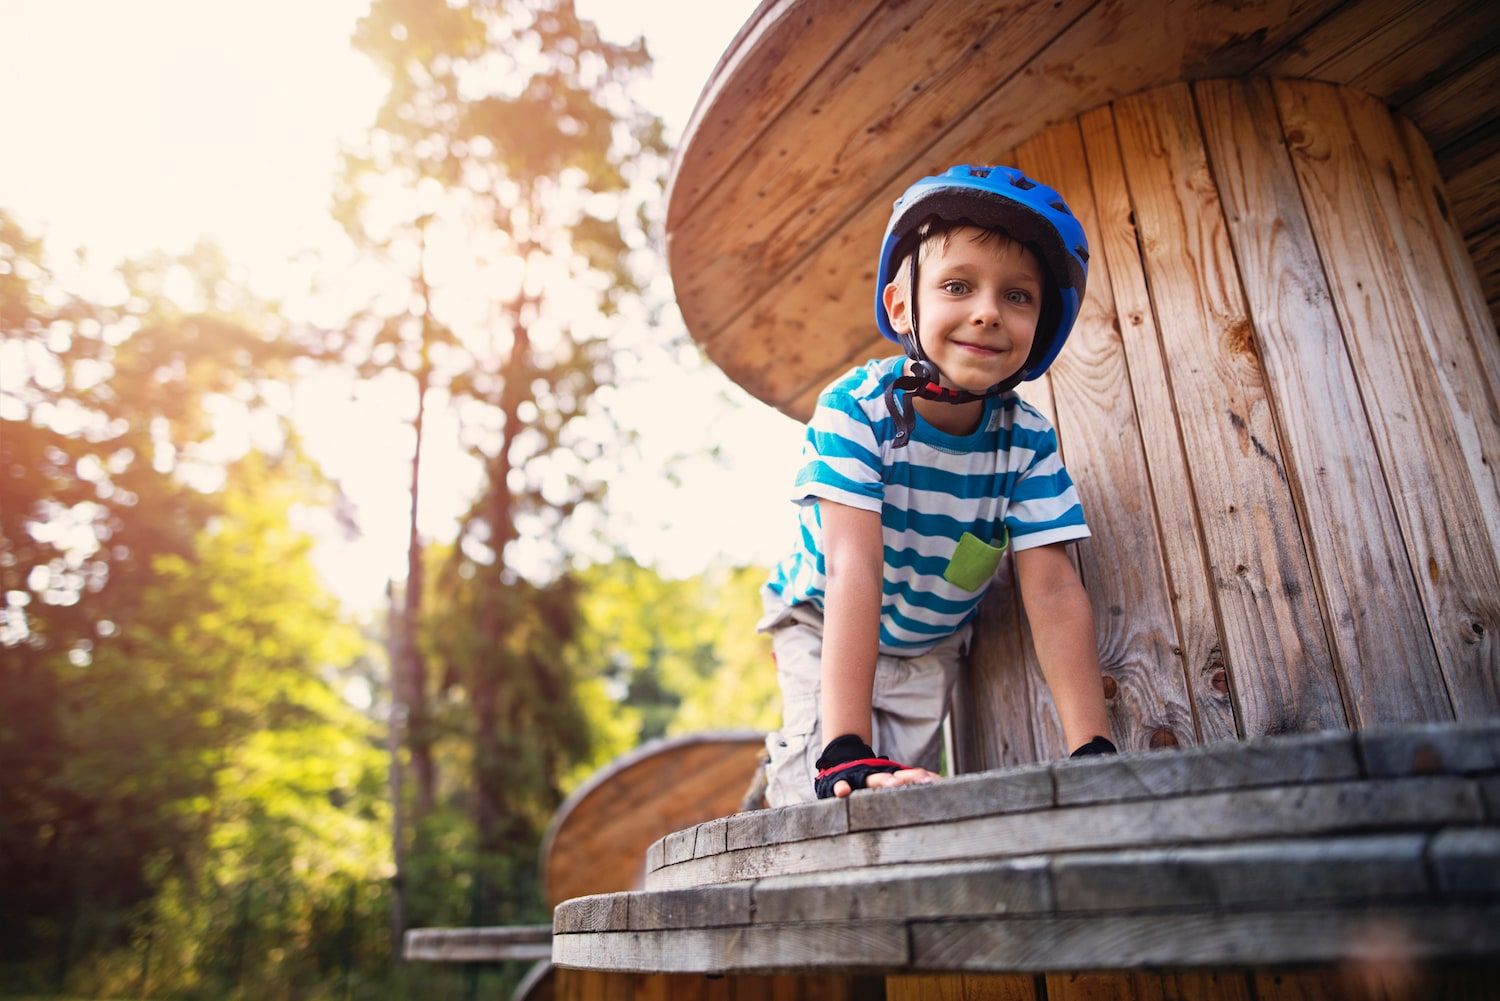 7 obstacle course ideas for kids of all ages